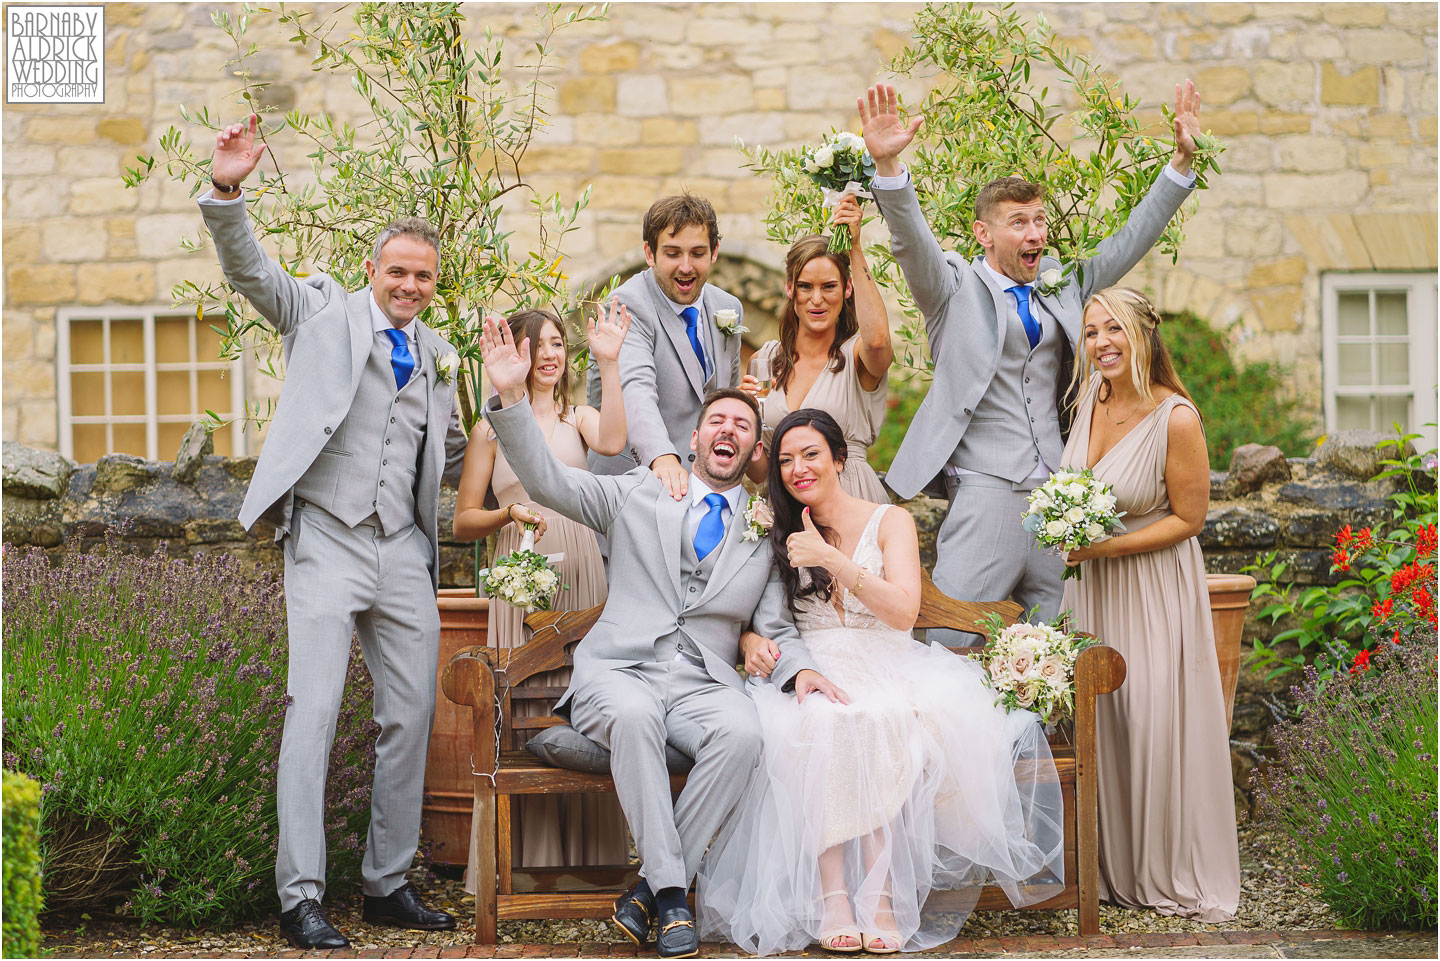 Priory Cottages Wedding Photos, Bridal Party at Priory Cottages, Priory Barn Yorkshire Wedding Photographer, Priory Cottages Wedding, Priory Farm and Cottages Wedding, Yorkshire Wedding Photographer